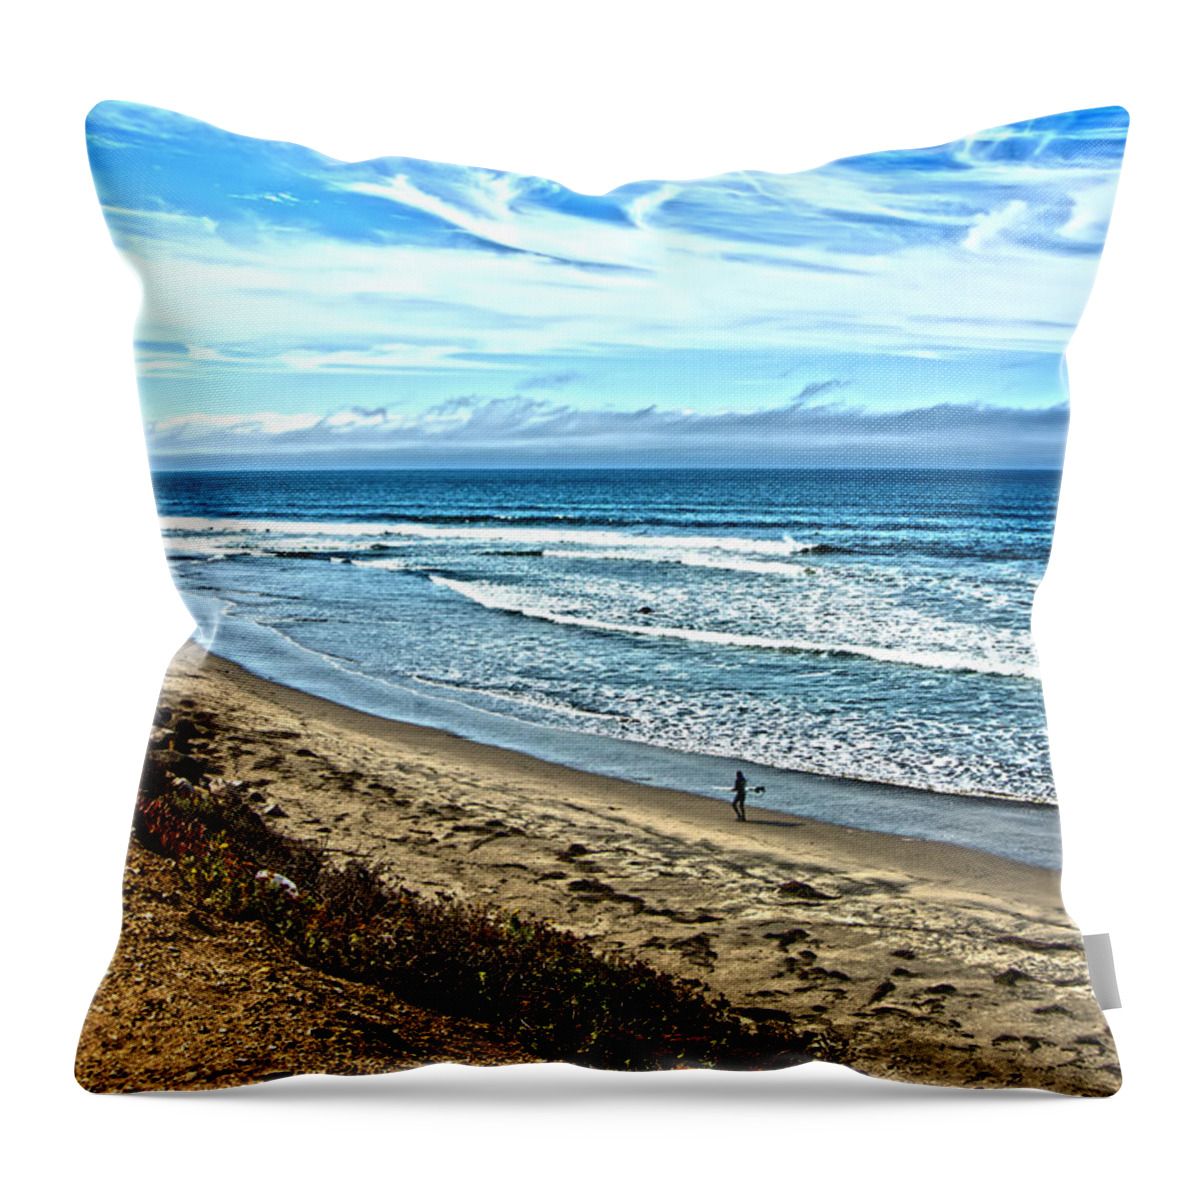 Pacific Ocean Throw Pillow featuring the photograph Checking Out The Waves by Randall Branham